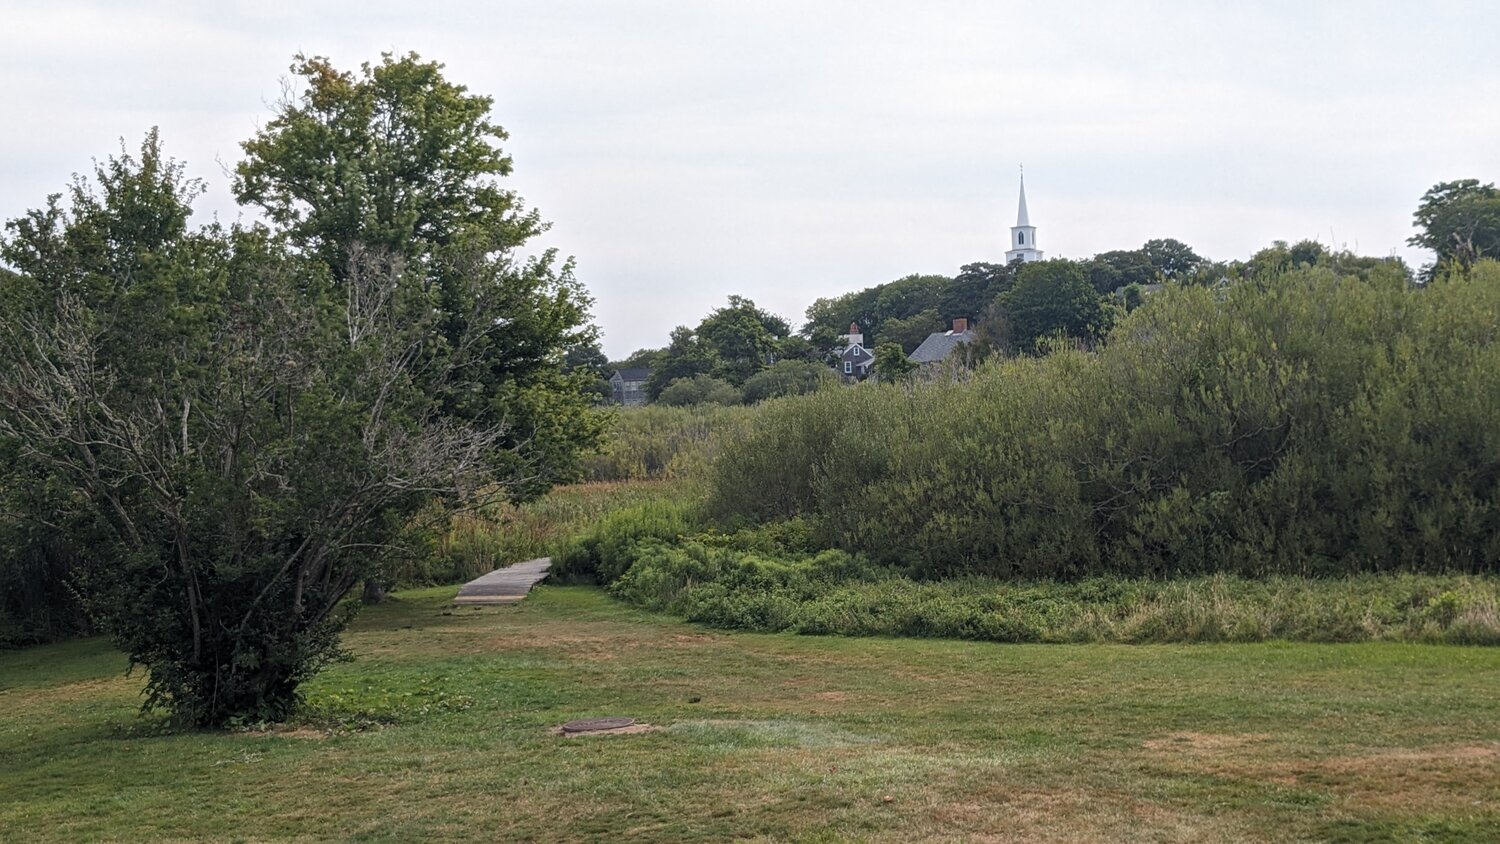 Lily Pond Park has a trail system of paths and boardwalks that lead through the property of low wetlands that once connected the pond to Nantucket Harbor.